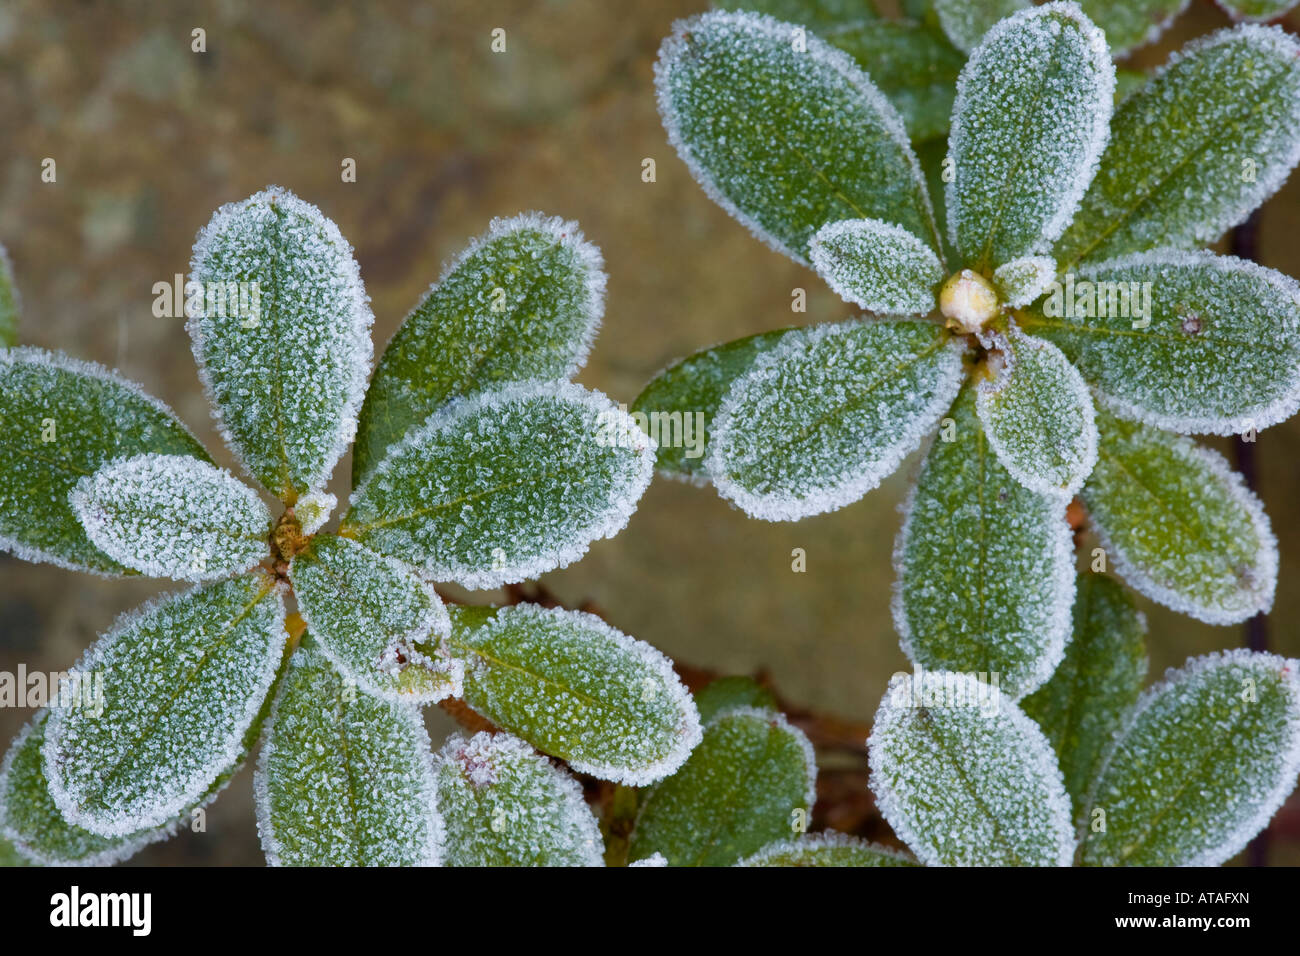 Frost on leaves of dwarf rhododendron plant Stock Photo